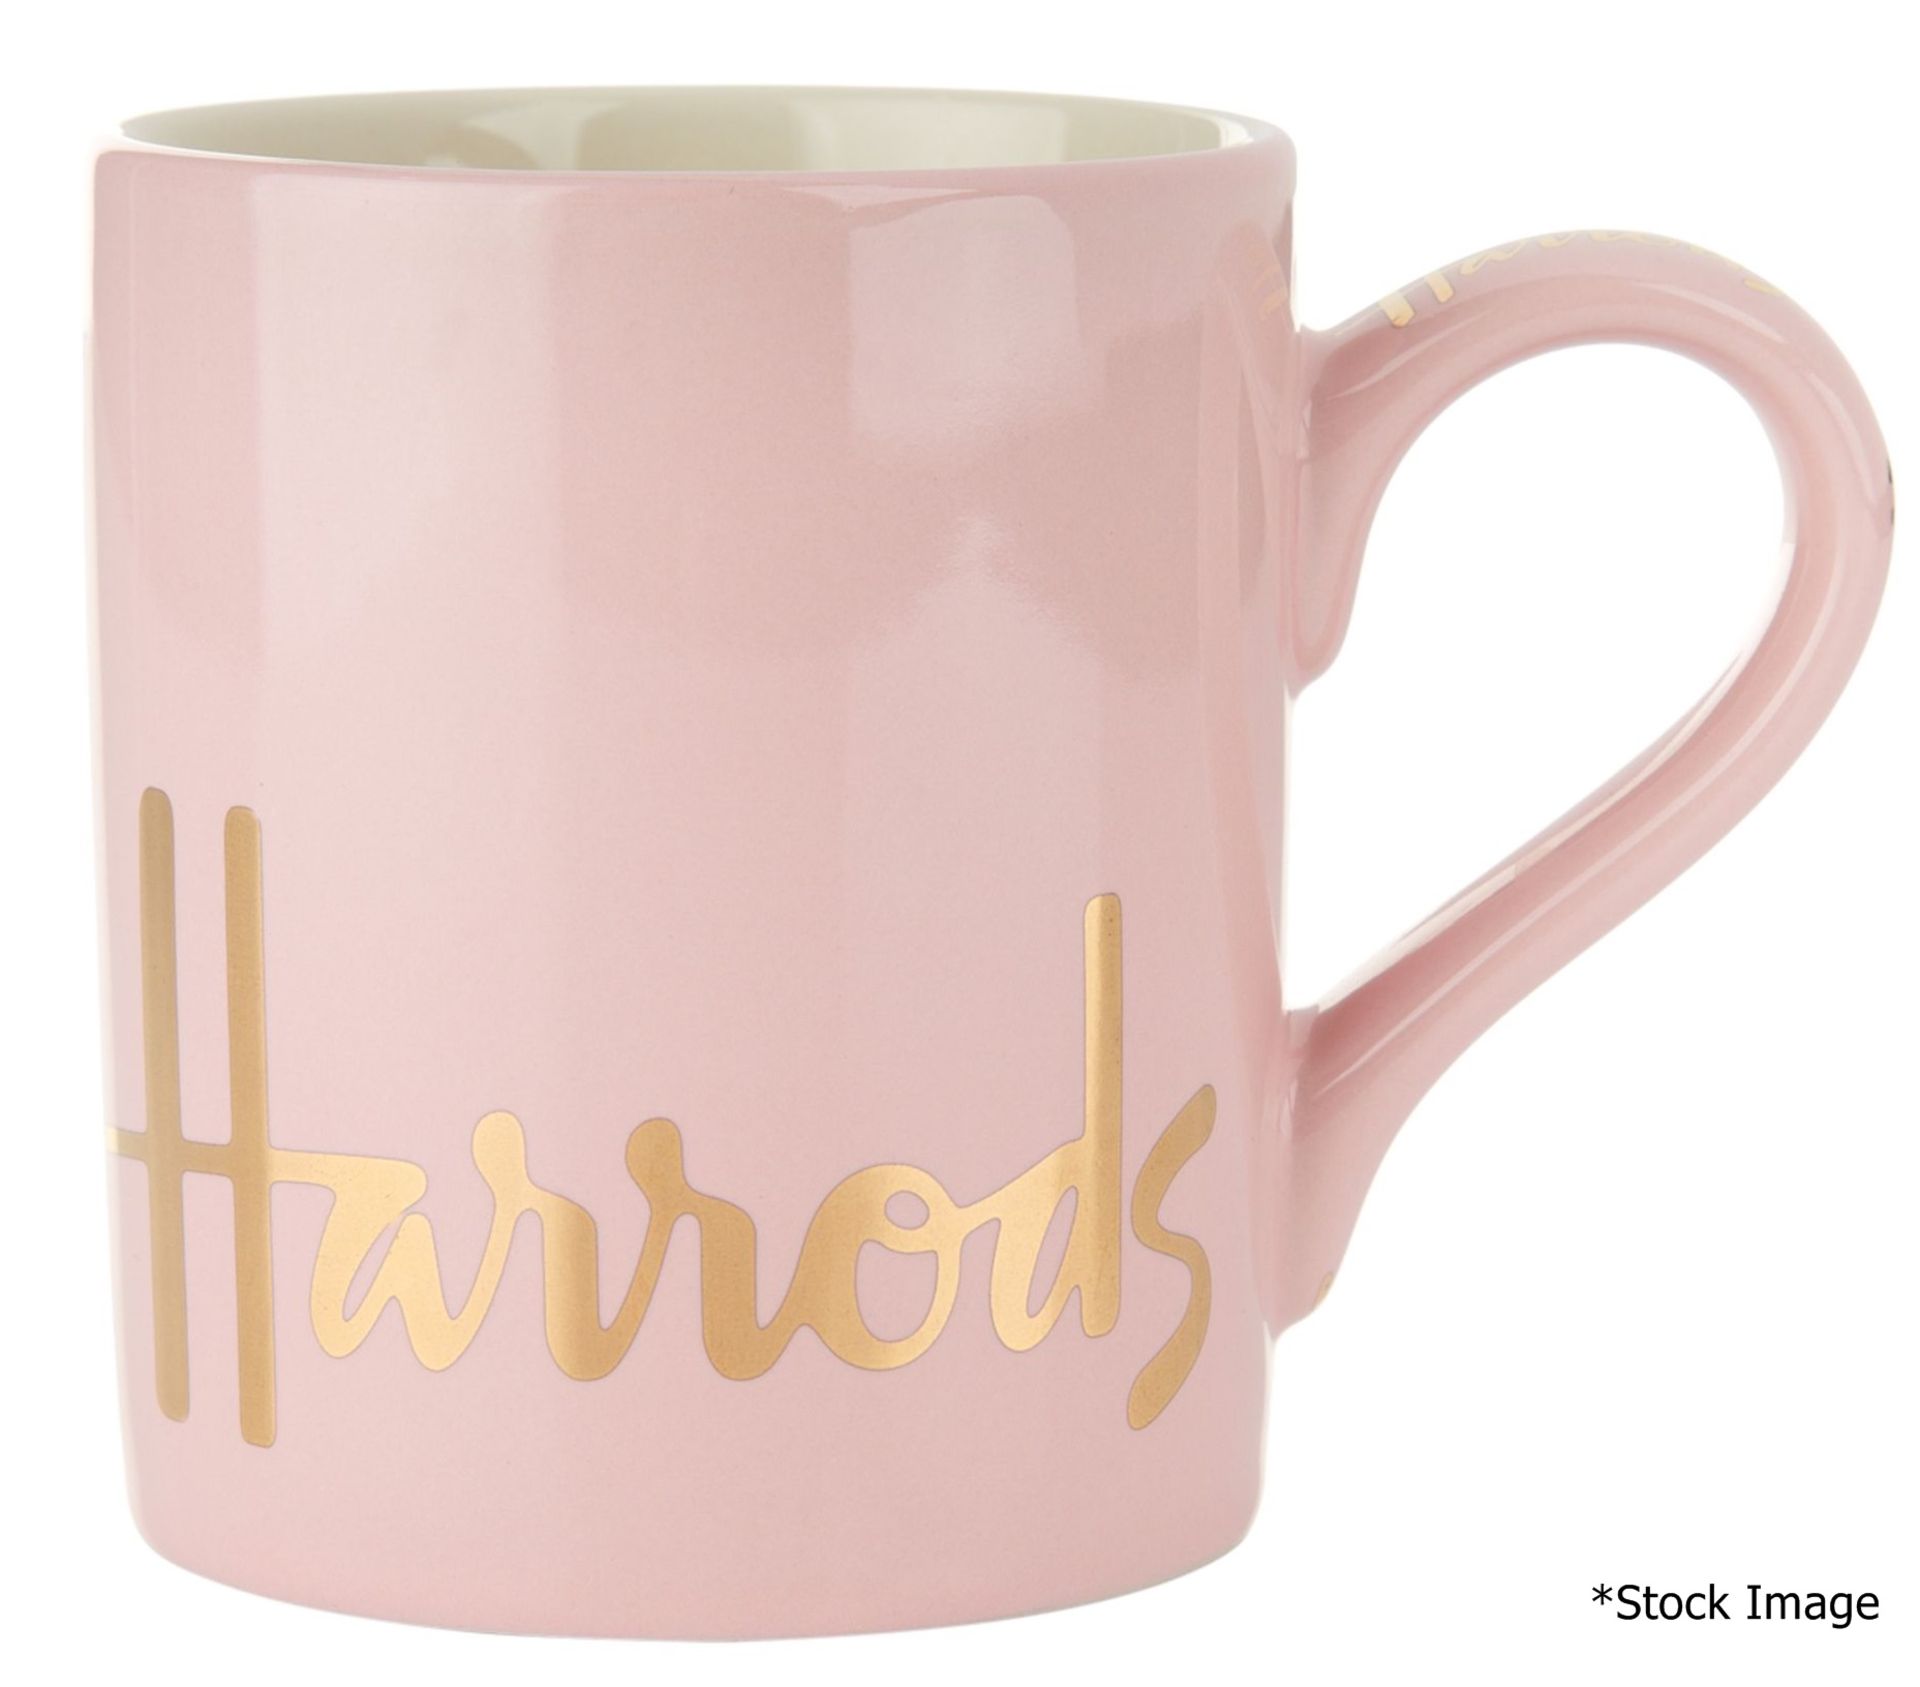 Set Of 6 x HARRODS Branded Mugs In Pink With Gold-Tone Logo Design - Dimensions: 9cm x 8cm - - Image 2 of 7